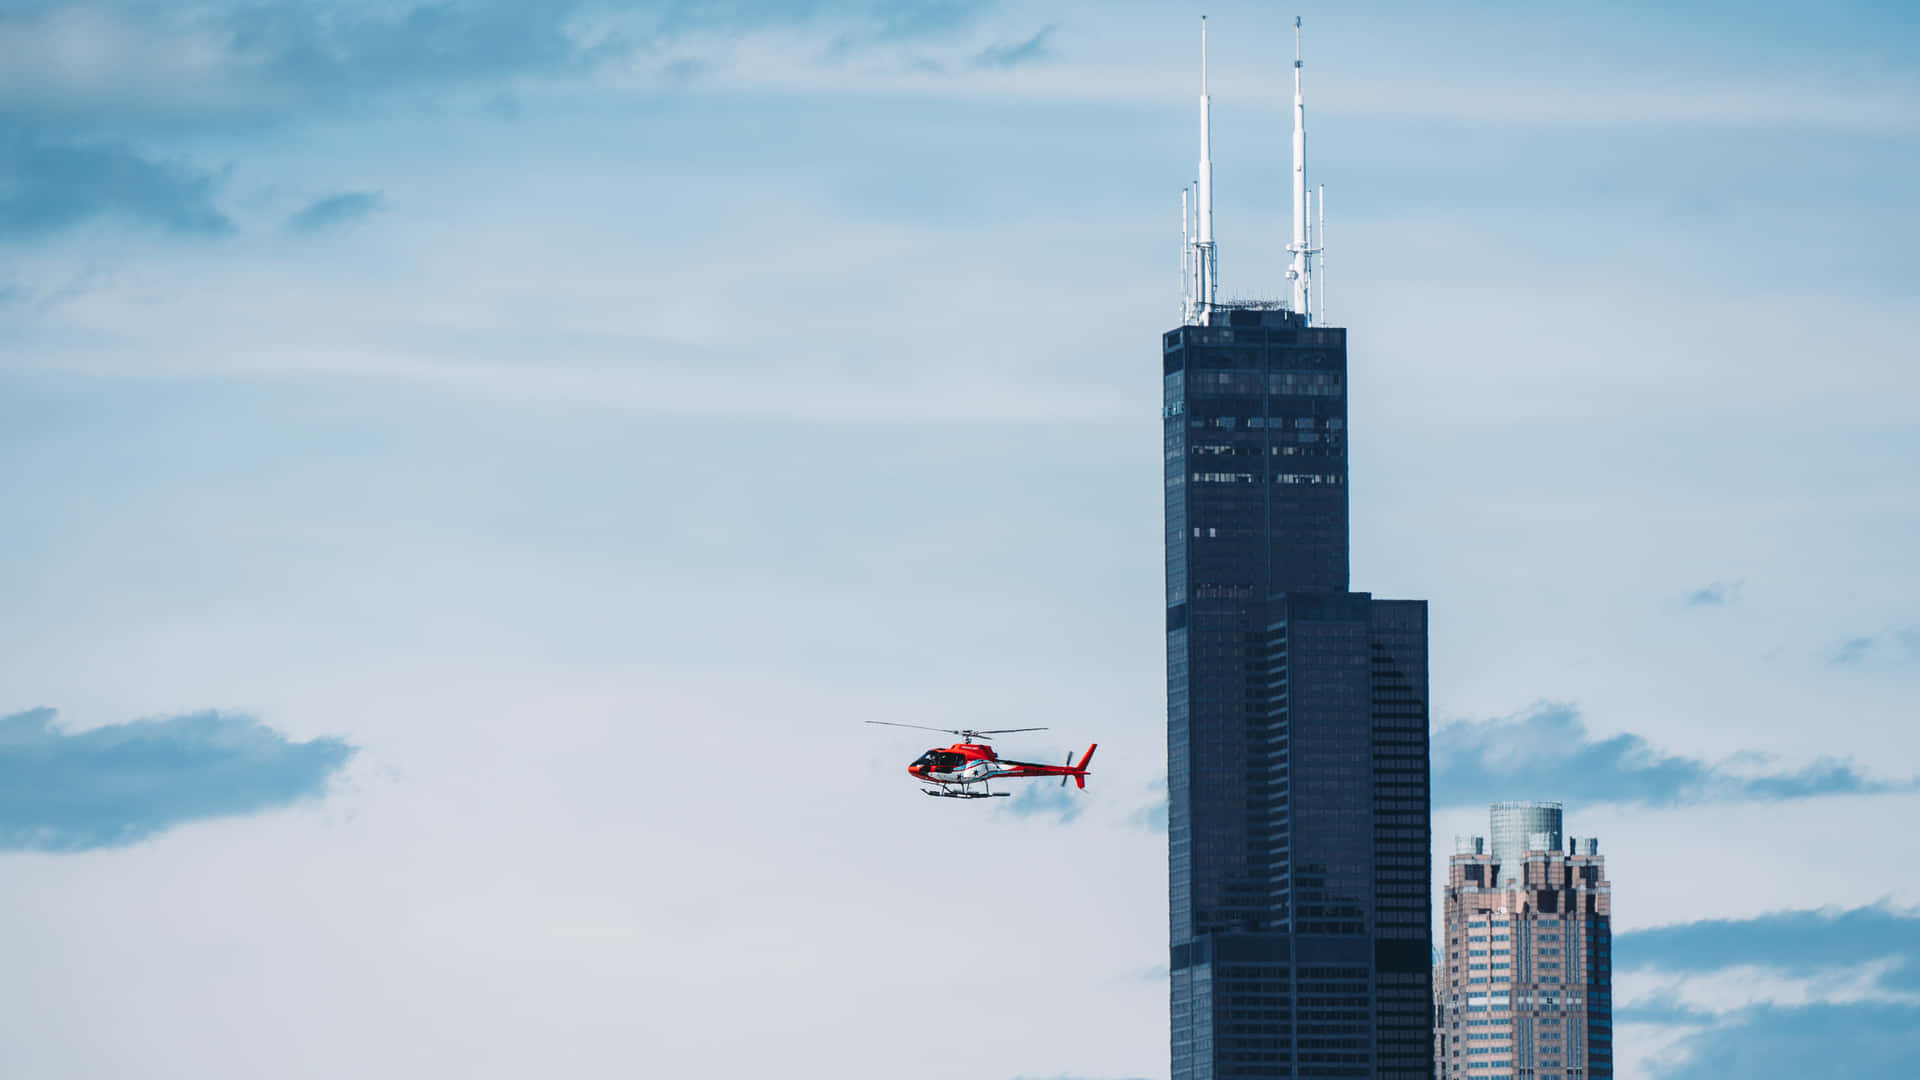 Perfectly Captured Flight: A Stunning Helicopter Soaring Through The Skies